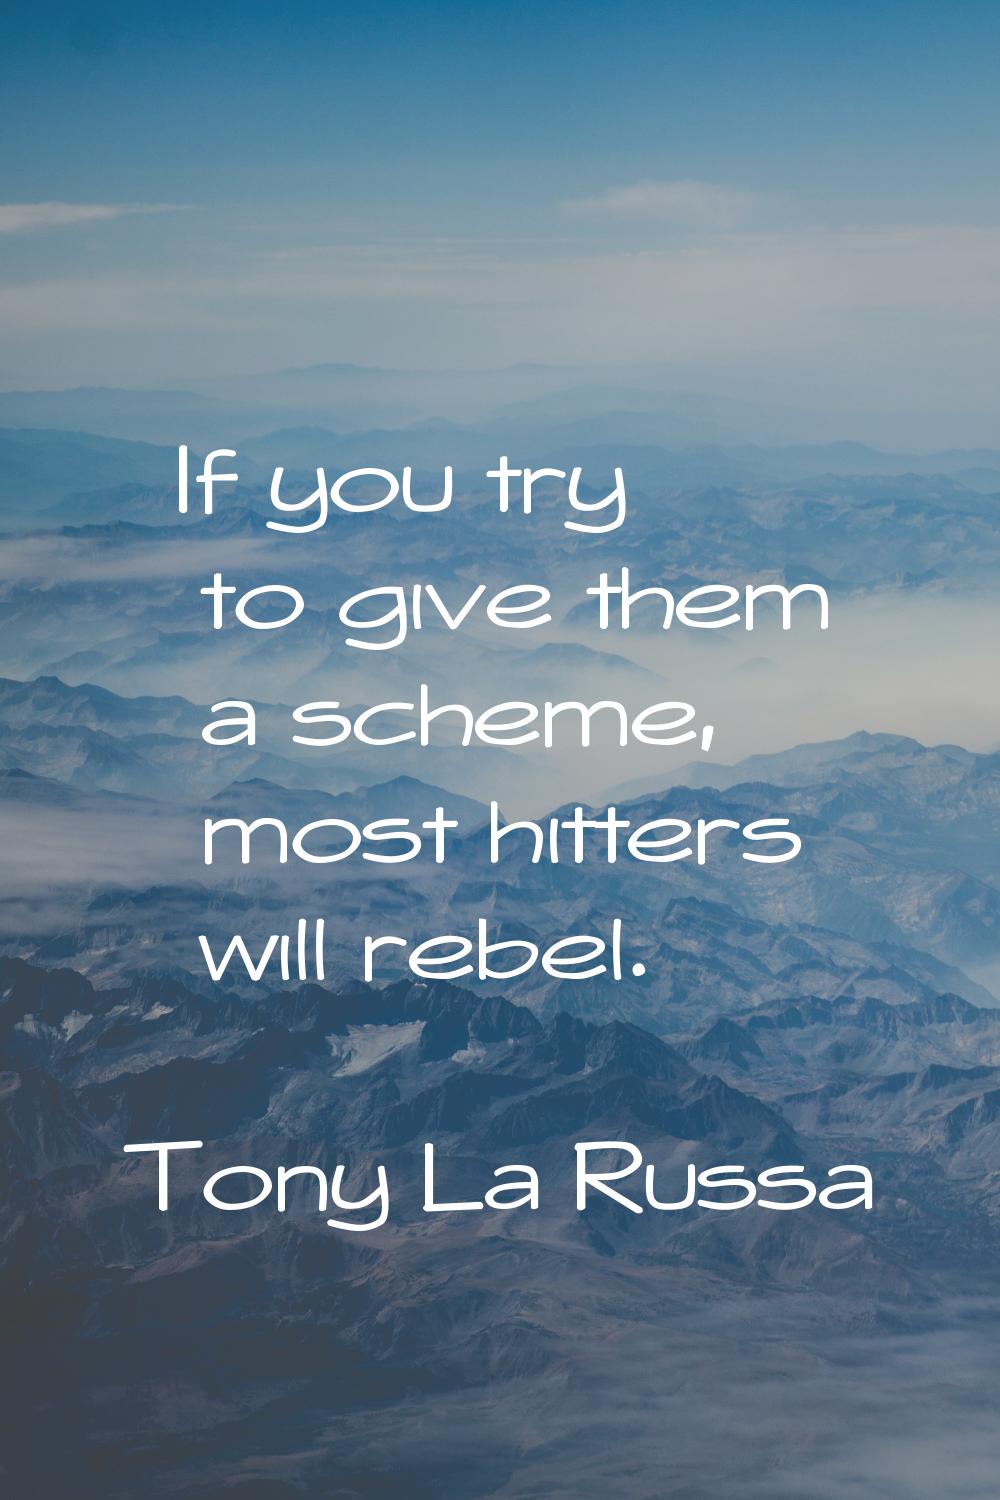 If you try to give them a scheme, most hitters will rebel.